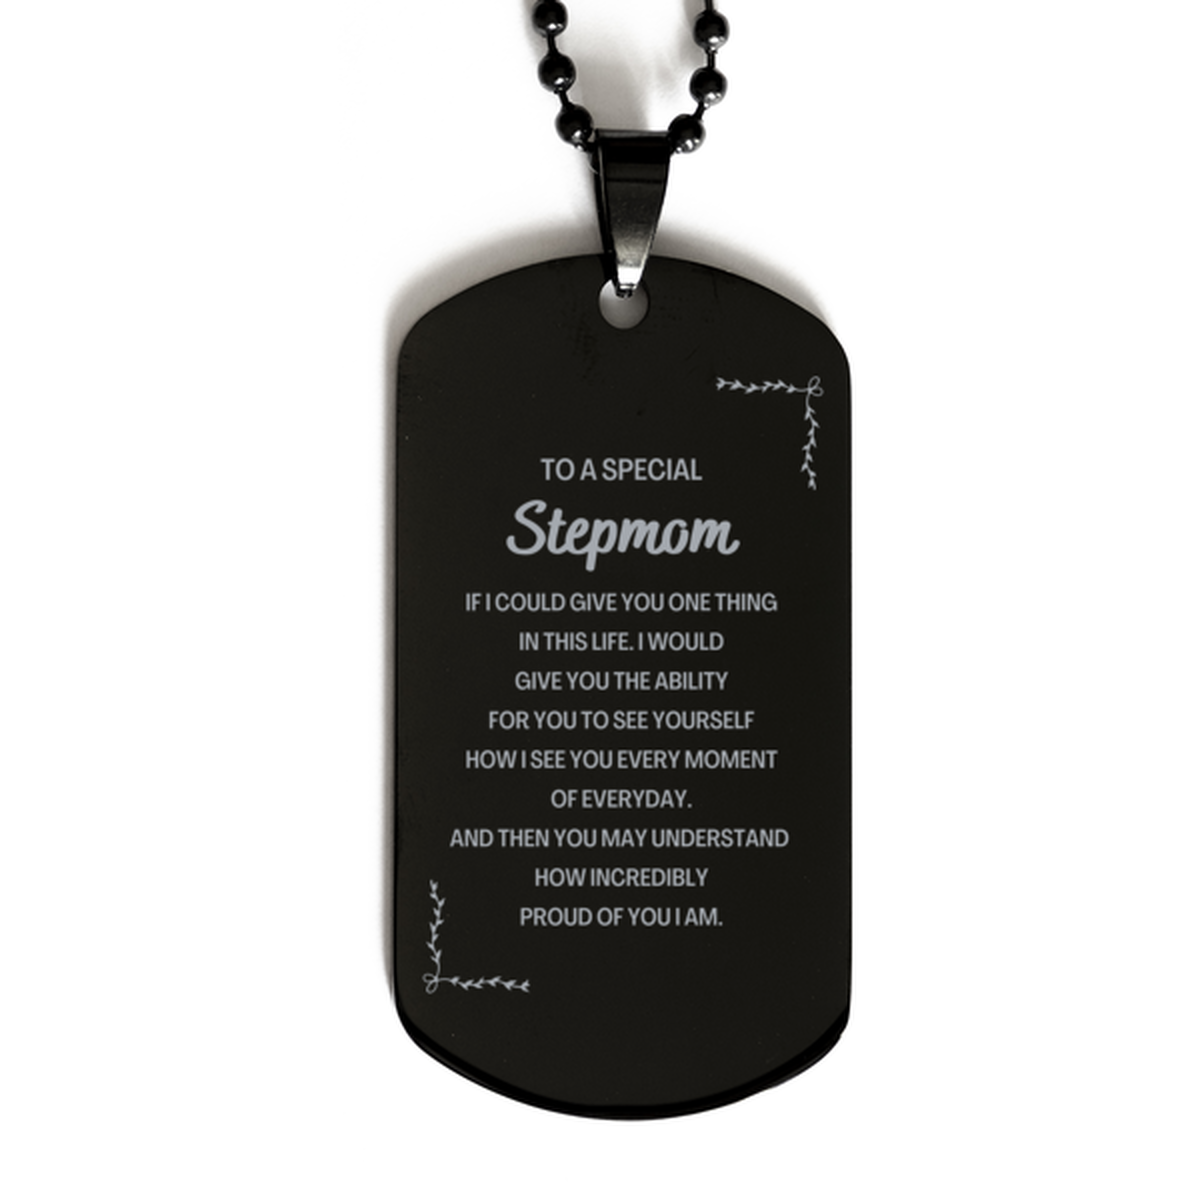 To My Stepmom Black Dog Tag, Gifts For Stepmom Engraved, Inspirational Gifts for Christmas Birthday, Epic Gifts for Stepmom To A Special Stepmom how incredibly proud of you I am